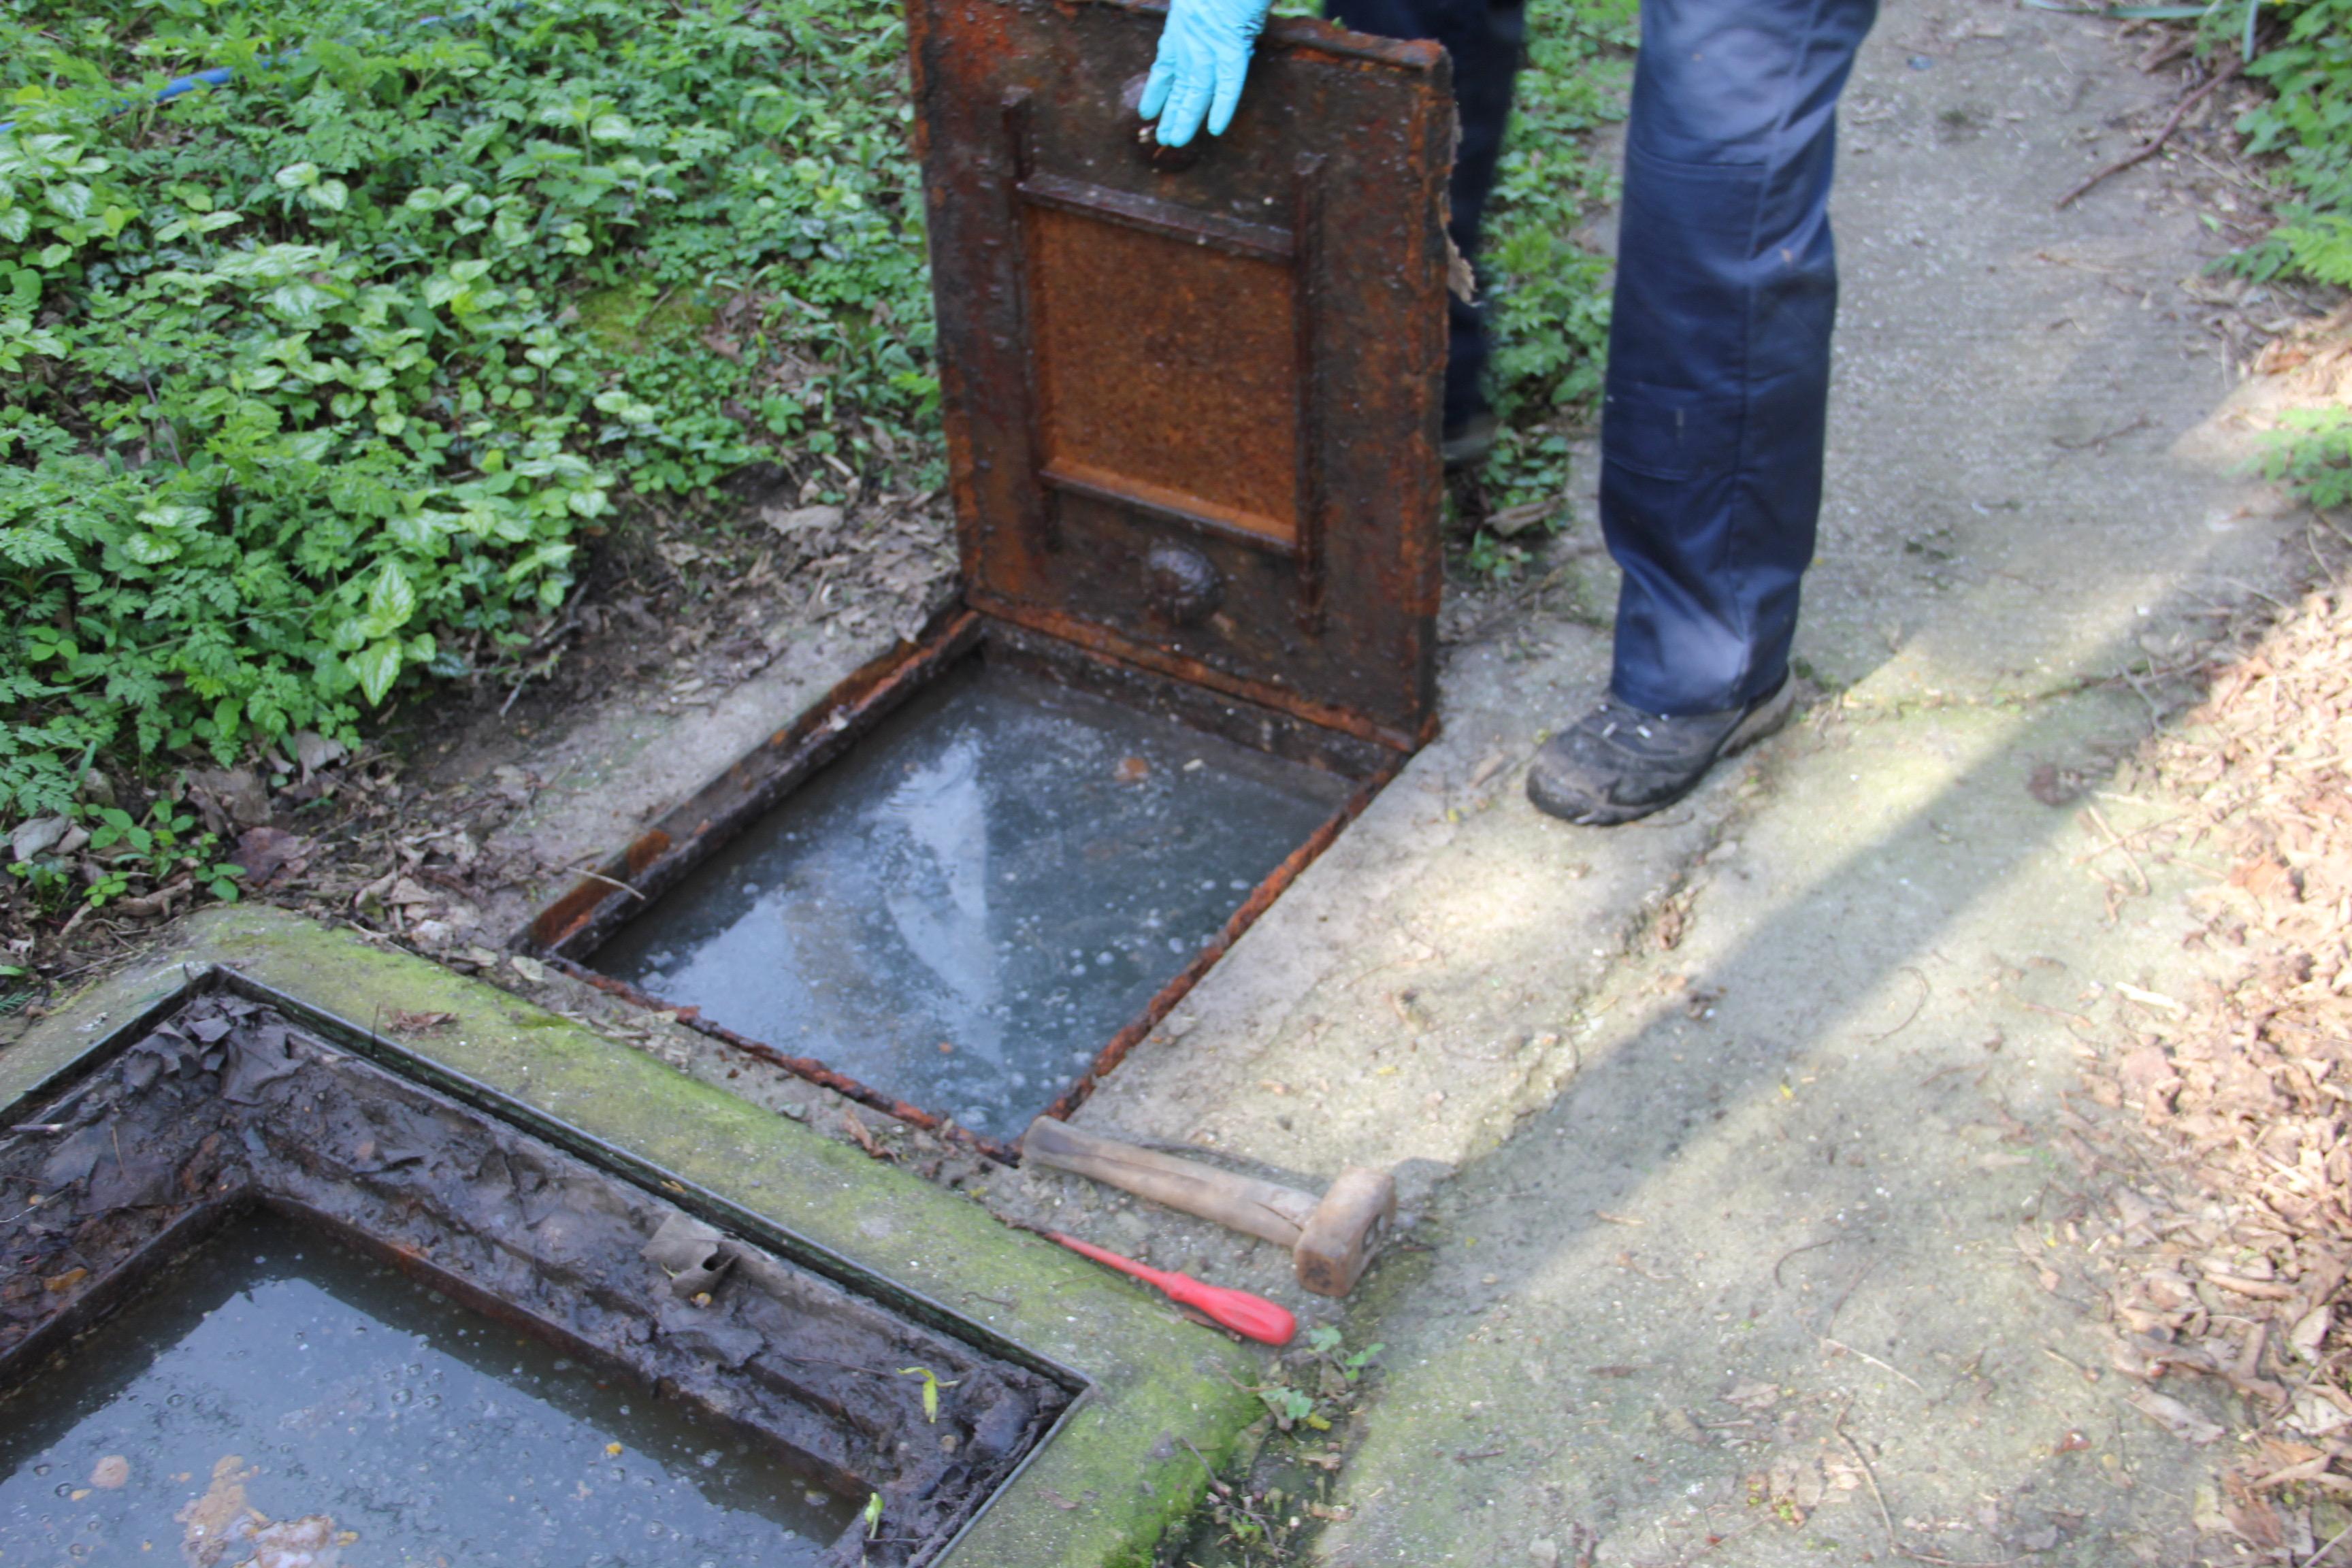 A picture of a septic tank inspection chamber with the covers lifted to empty.